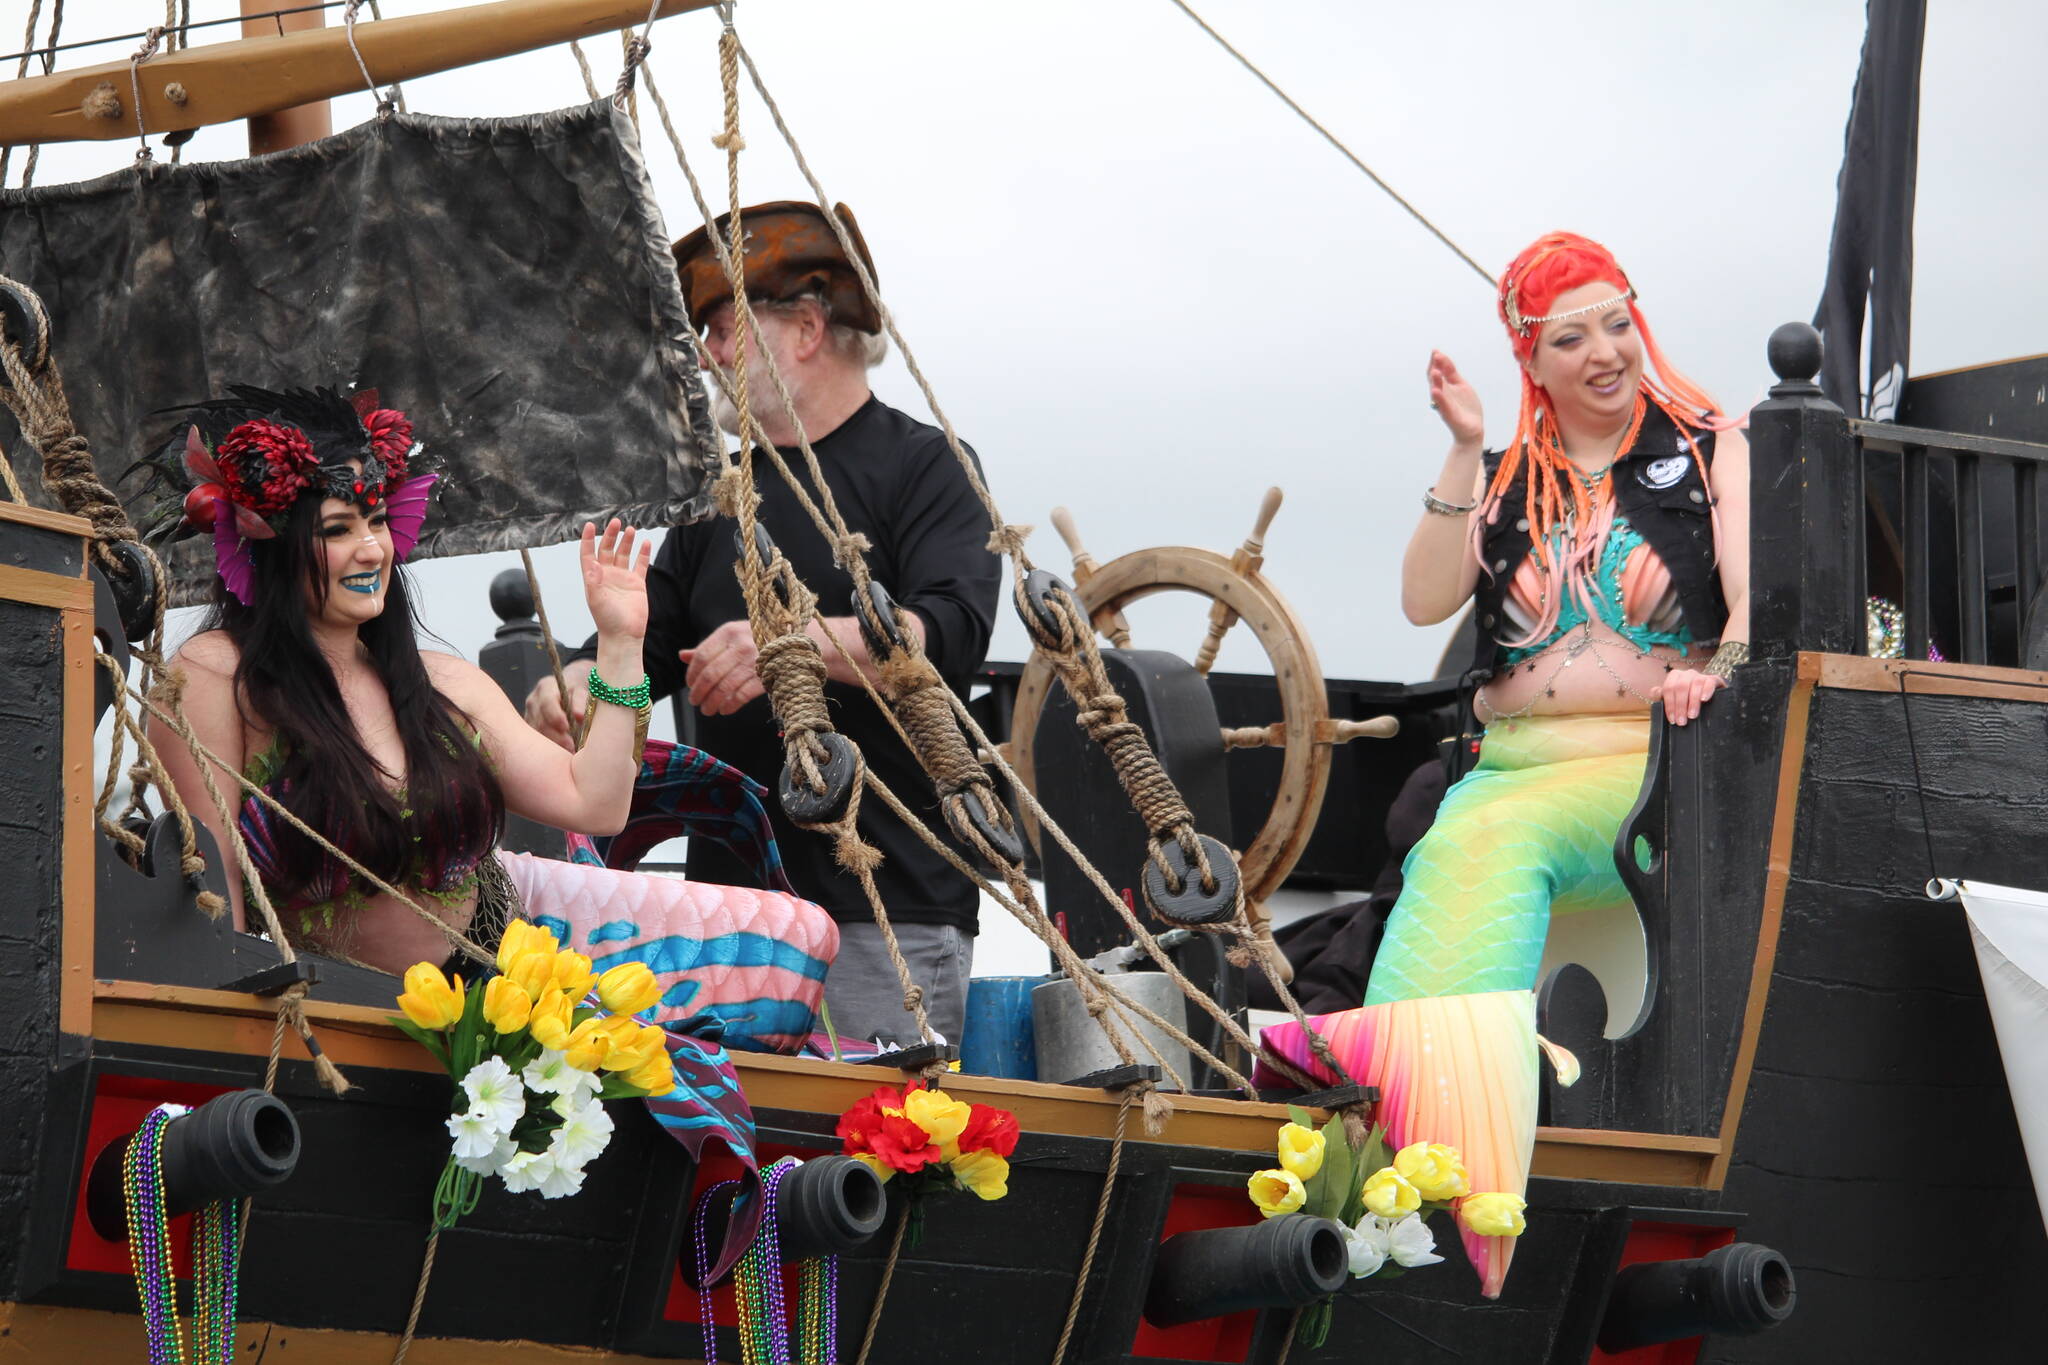 A couple of mermaids with the Whidbey Island Pirates ride by on a pirate ship. (Photo by Karina Andrew/Whidbey News-Times)